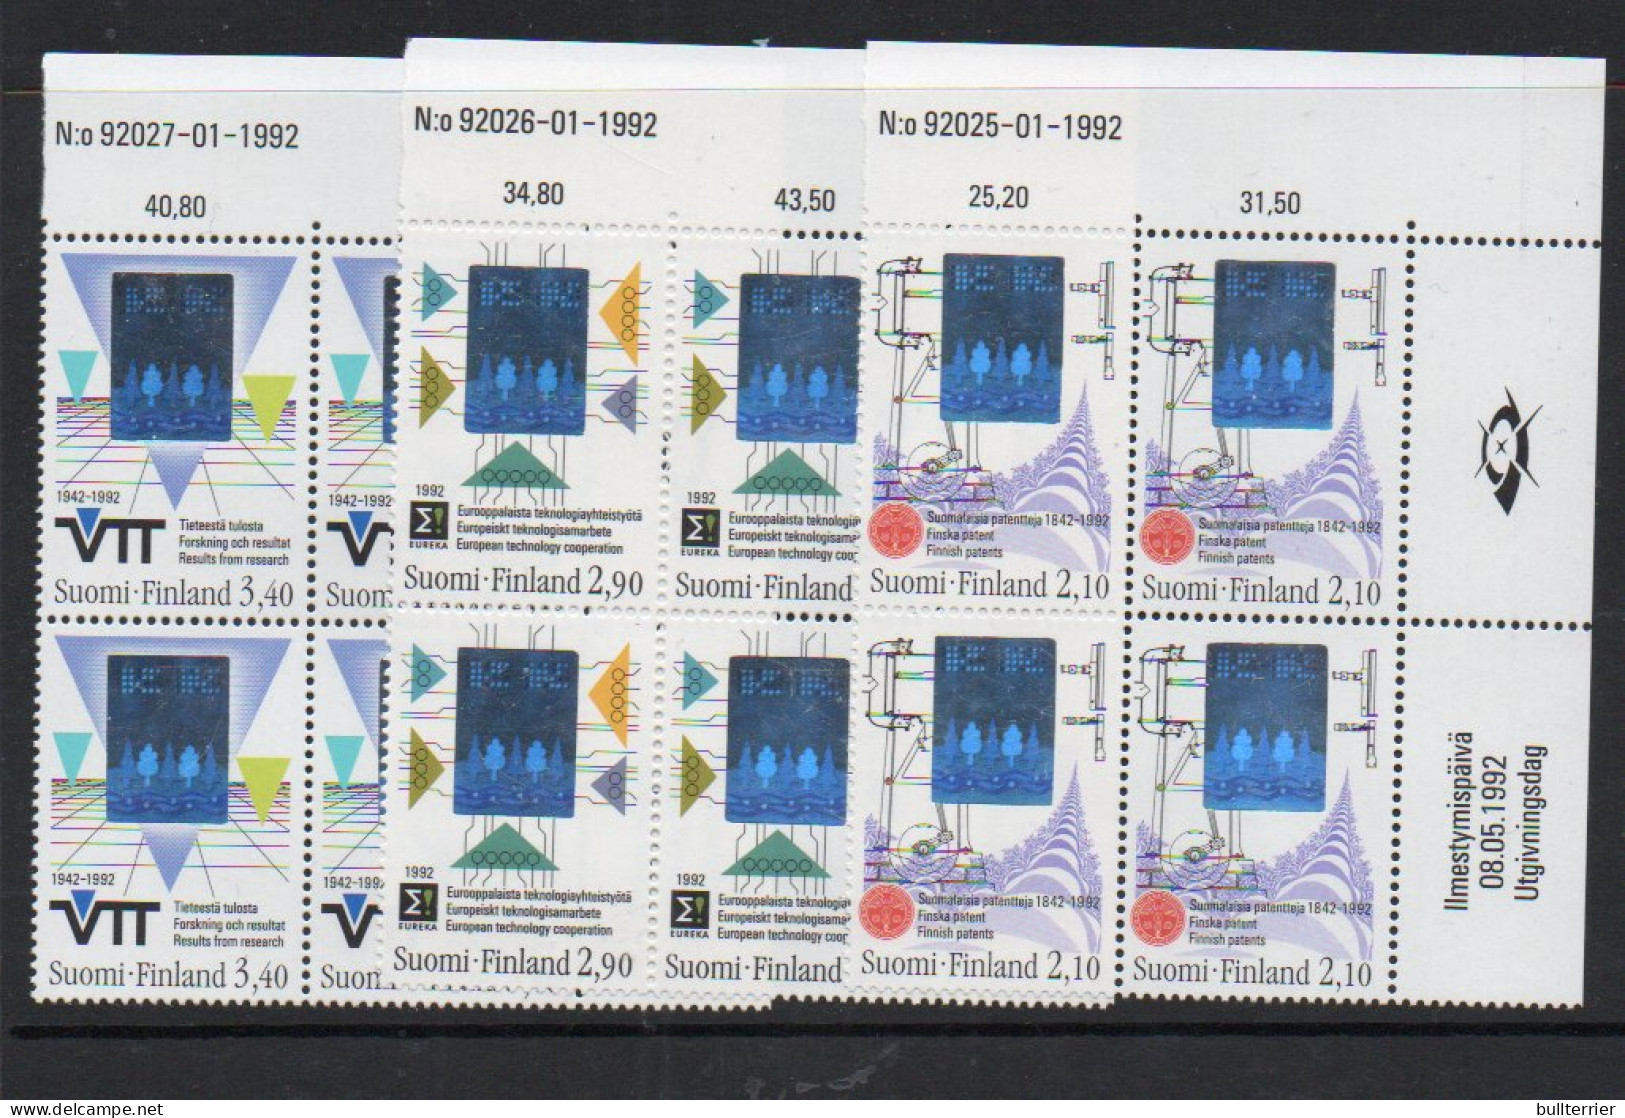 HOLOGRAMS - FINLAND - 1992 -TECHNOLOGY HOLOGRAMS SET OF 3 IN BLOCKS OF 4 MINT NEVER HINGED, SG CAT £35 - Hologramas